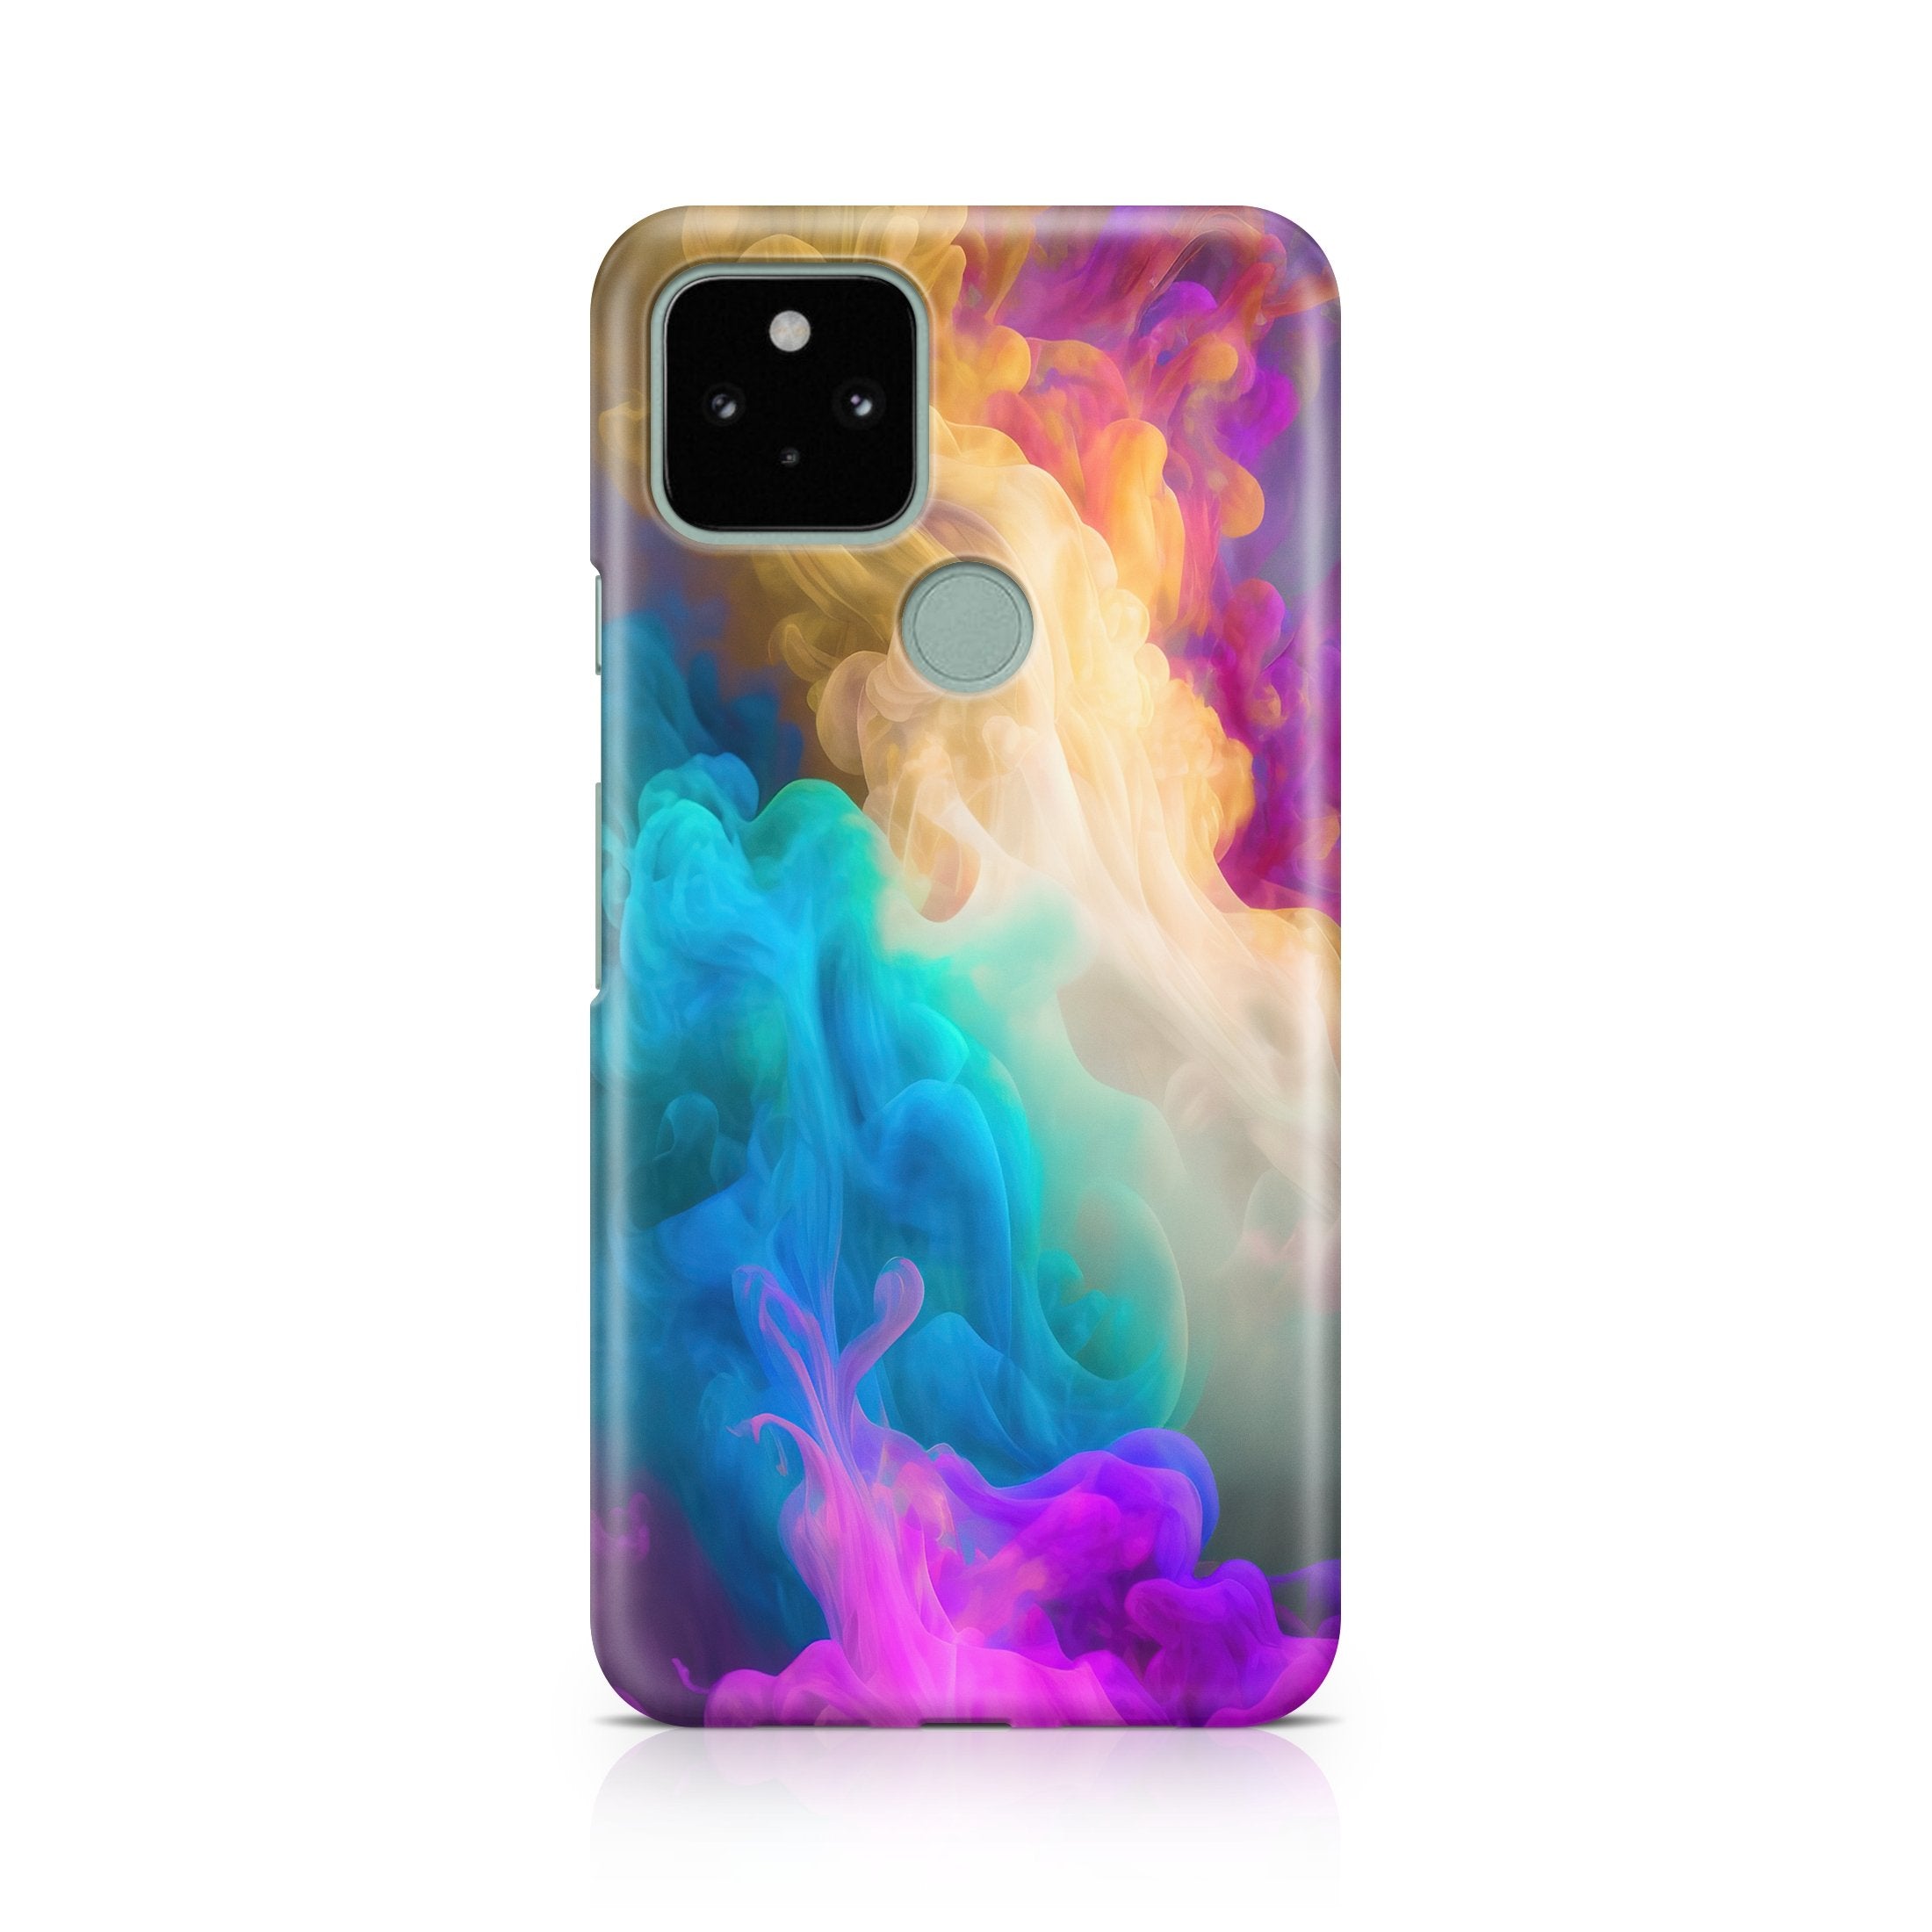 Prismatic Cloud - Google phone case designs by CaseSwagger